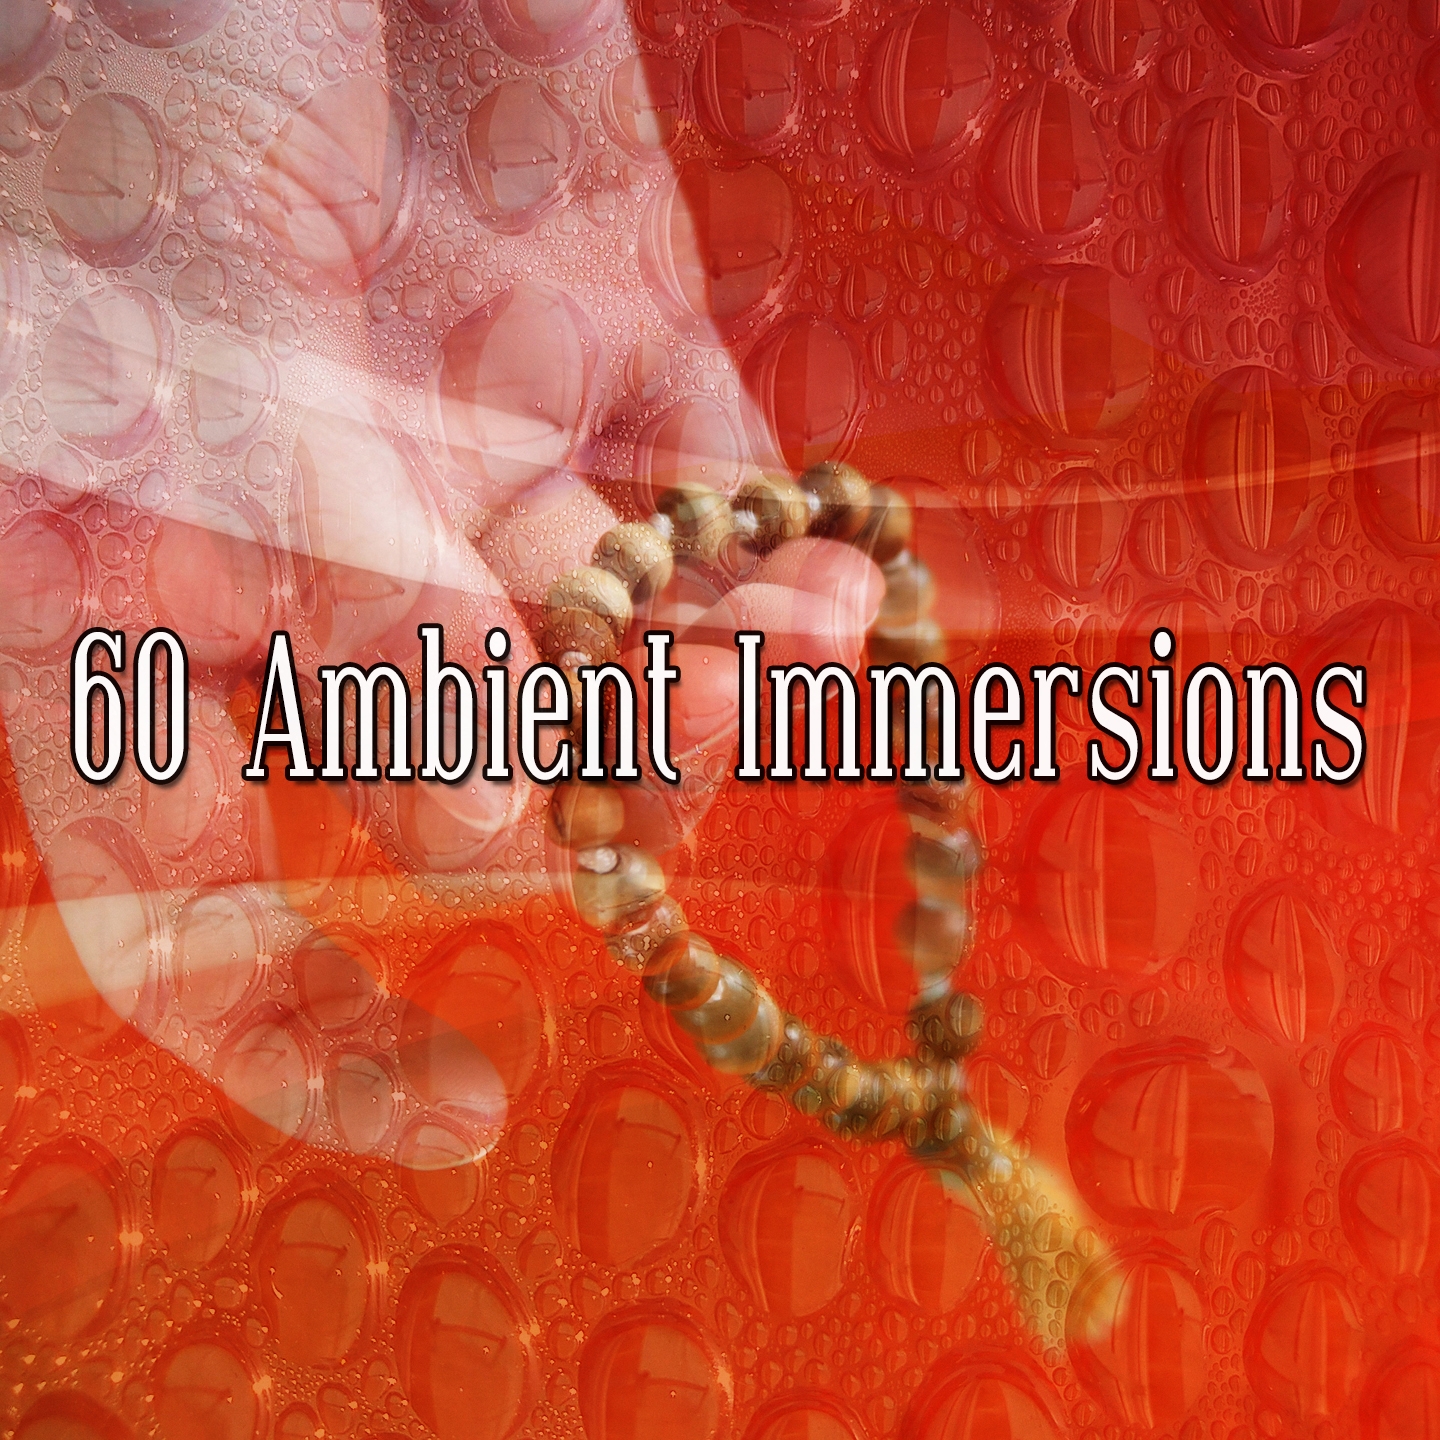 60 Ambient Immersions